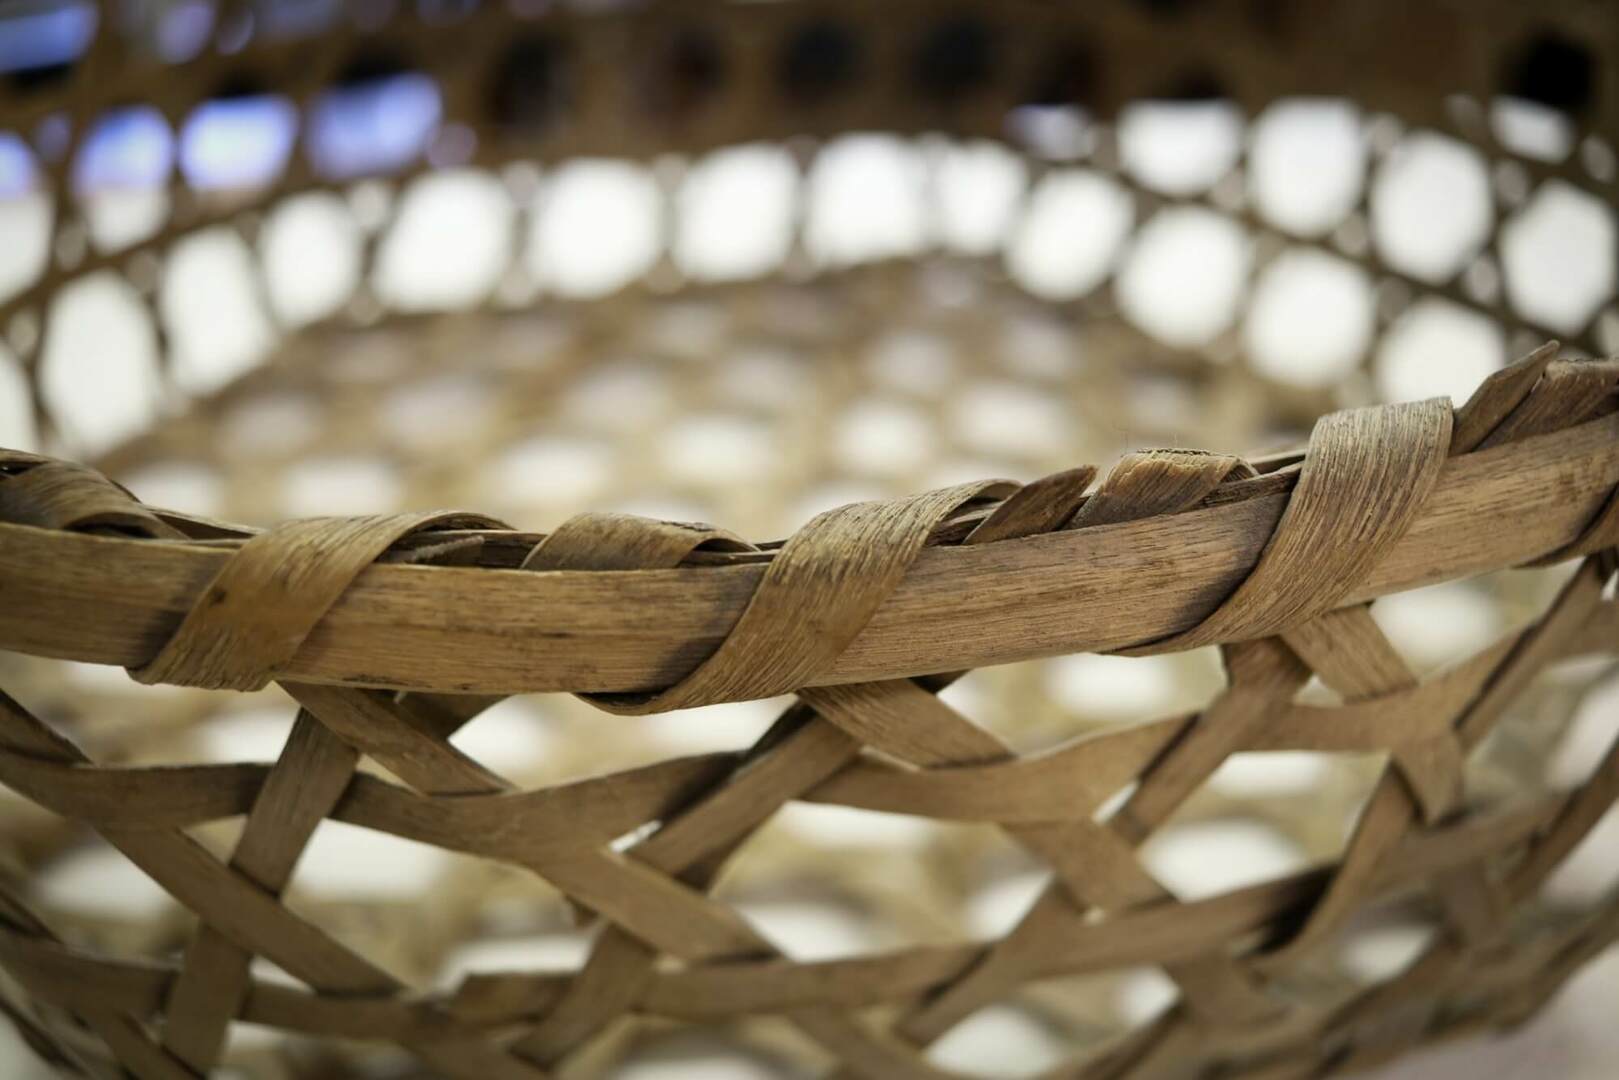 Close up of a woven basket